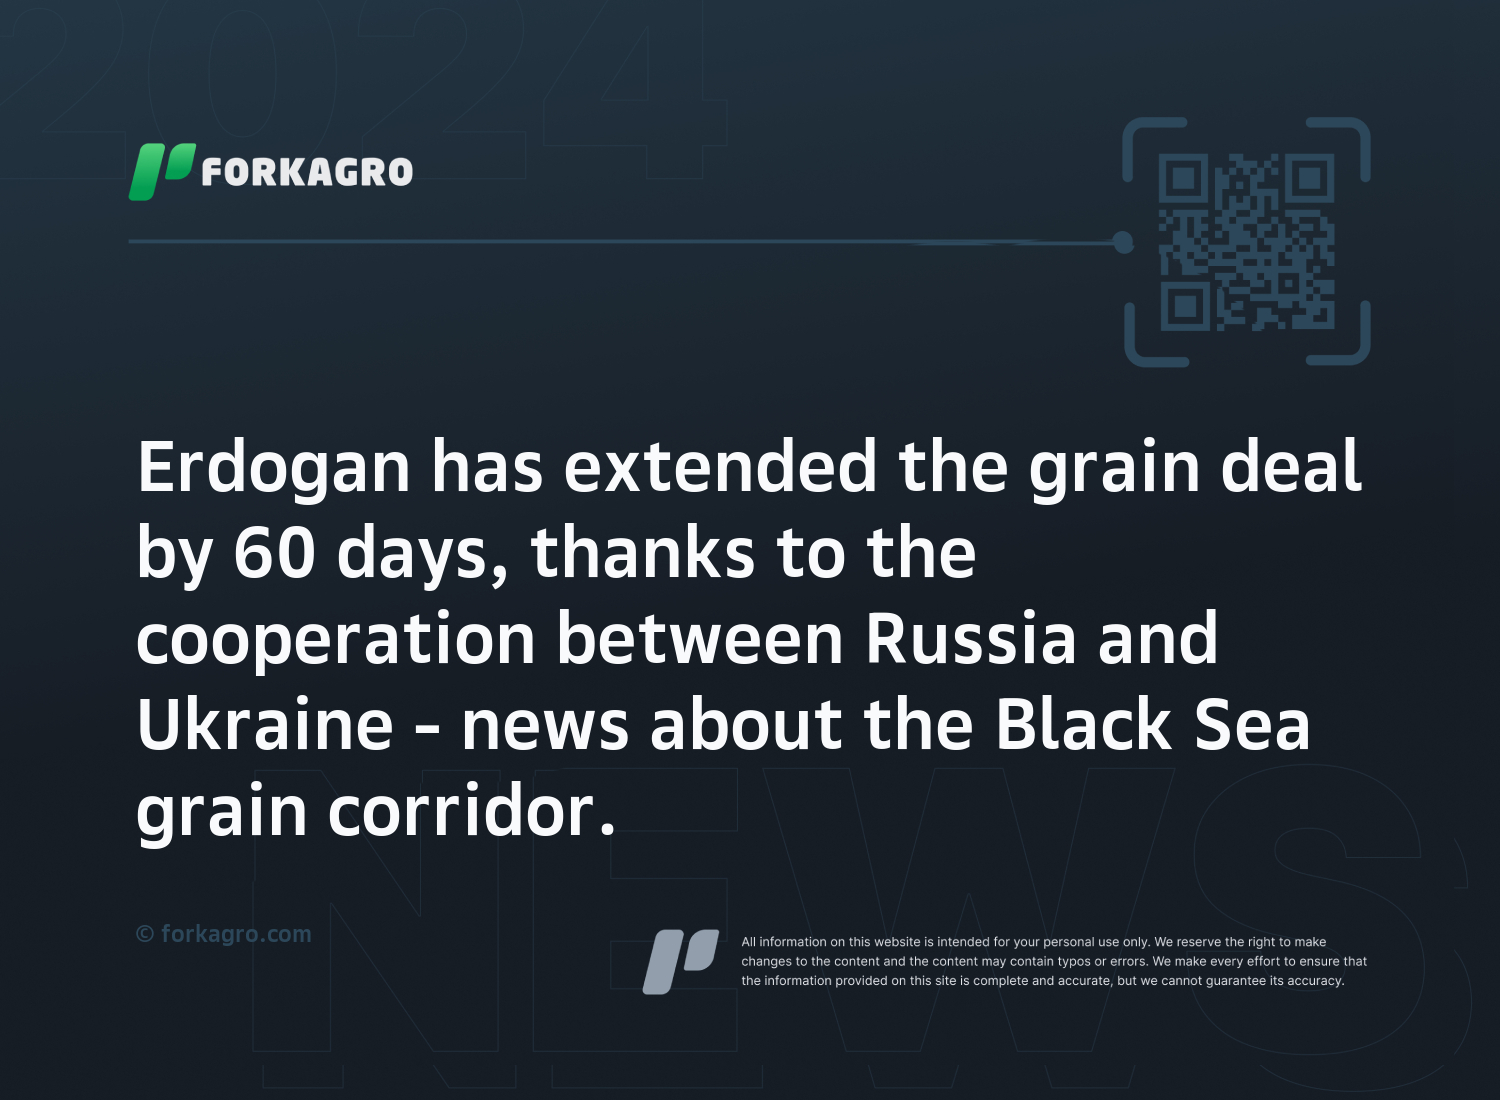 Erdogan has extended the grain deal by 60 days, thanks to the cooperation between Russia and Ukraine - news about the Black Sea grain corridor.